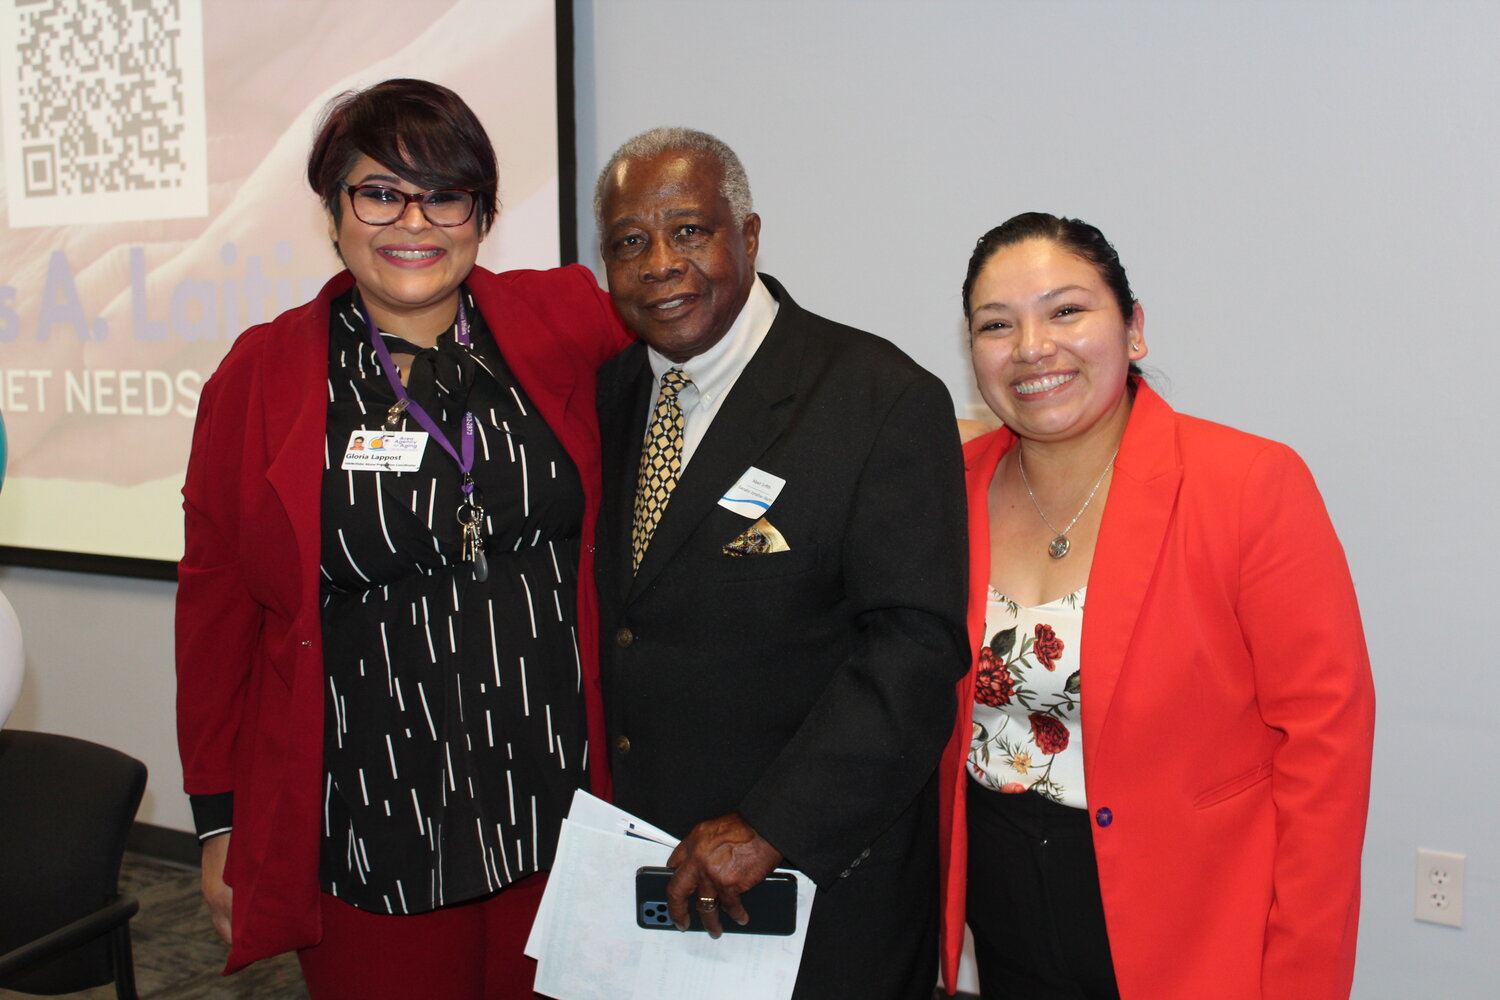 From left to right are Health & Wellness Coordinator, AAASWFL Gloria Lappost; Albert Griffith, representative from Senator Jonathan Martin’s office; Maricela Morado, president and CEO, AAASWFL.